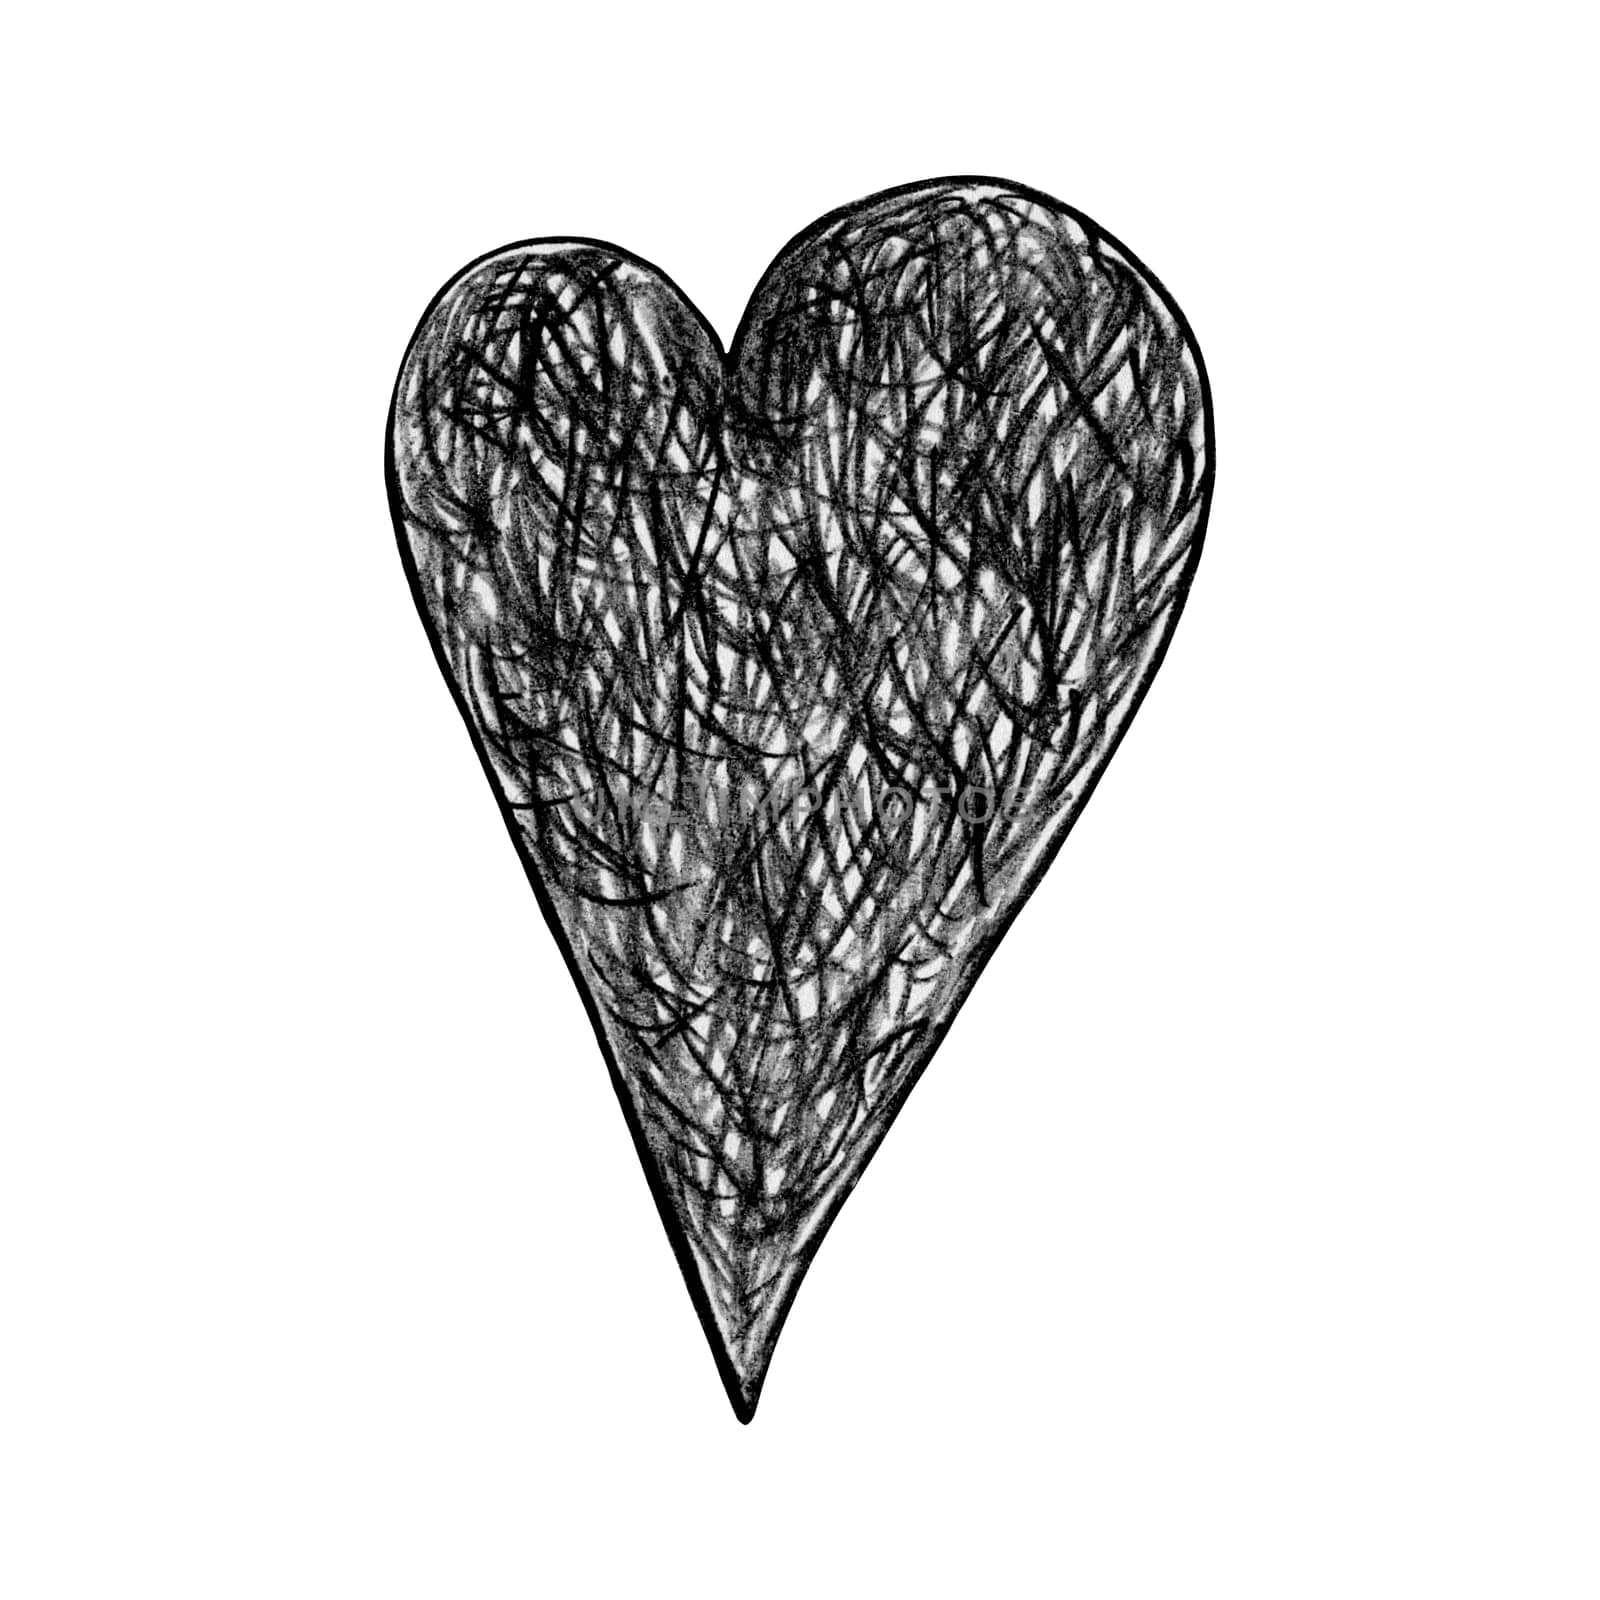 Black Heart Drawn by Colored Pencil. The Sign of World Heart Day. Symbol of Valentines Day. Heart Shape Isolated on White Background.